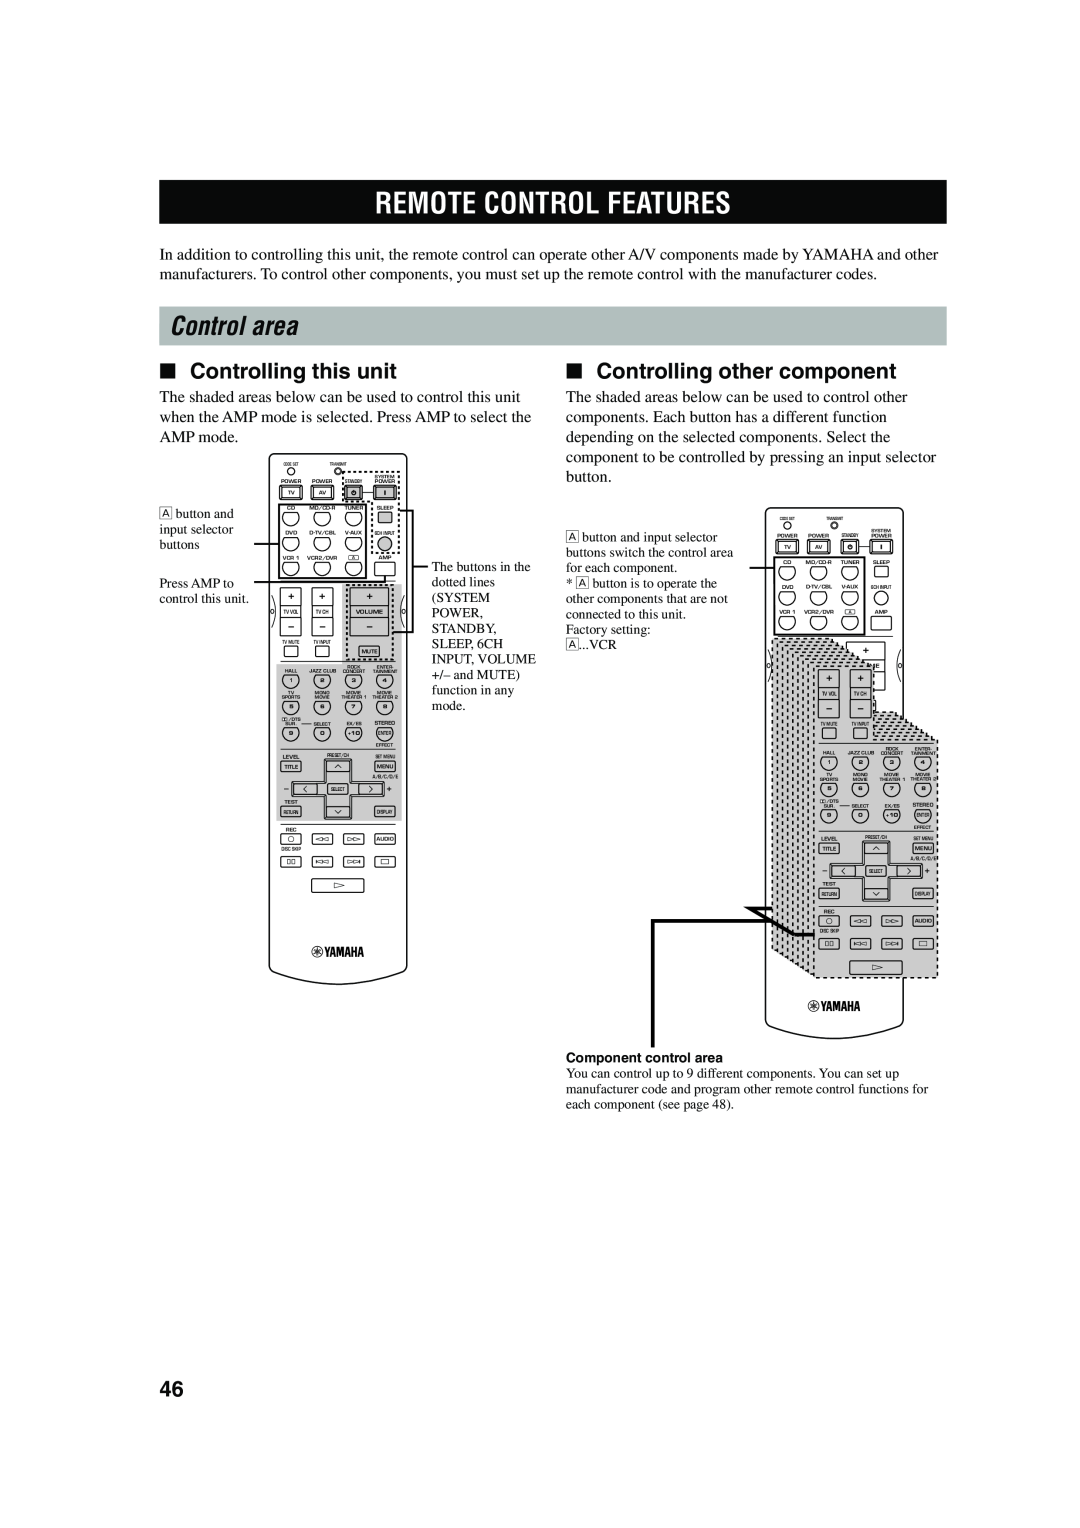 Yamaha HTR-5560 owner manual Remote Control Features, Control area, Controlling this unit, Controlling other component 